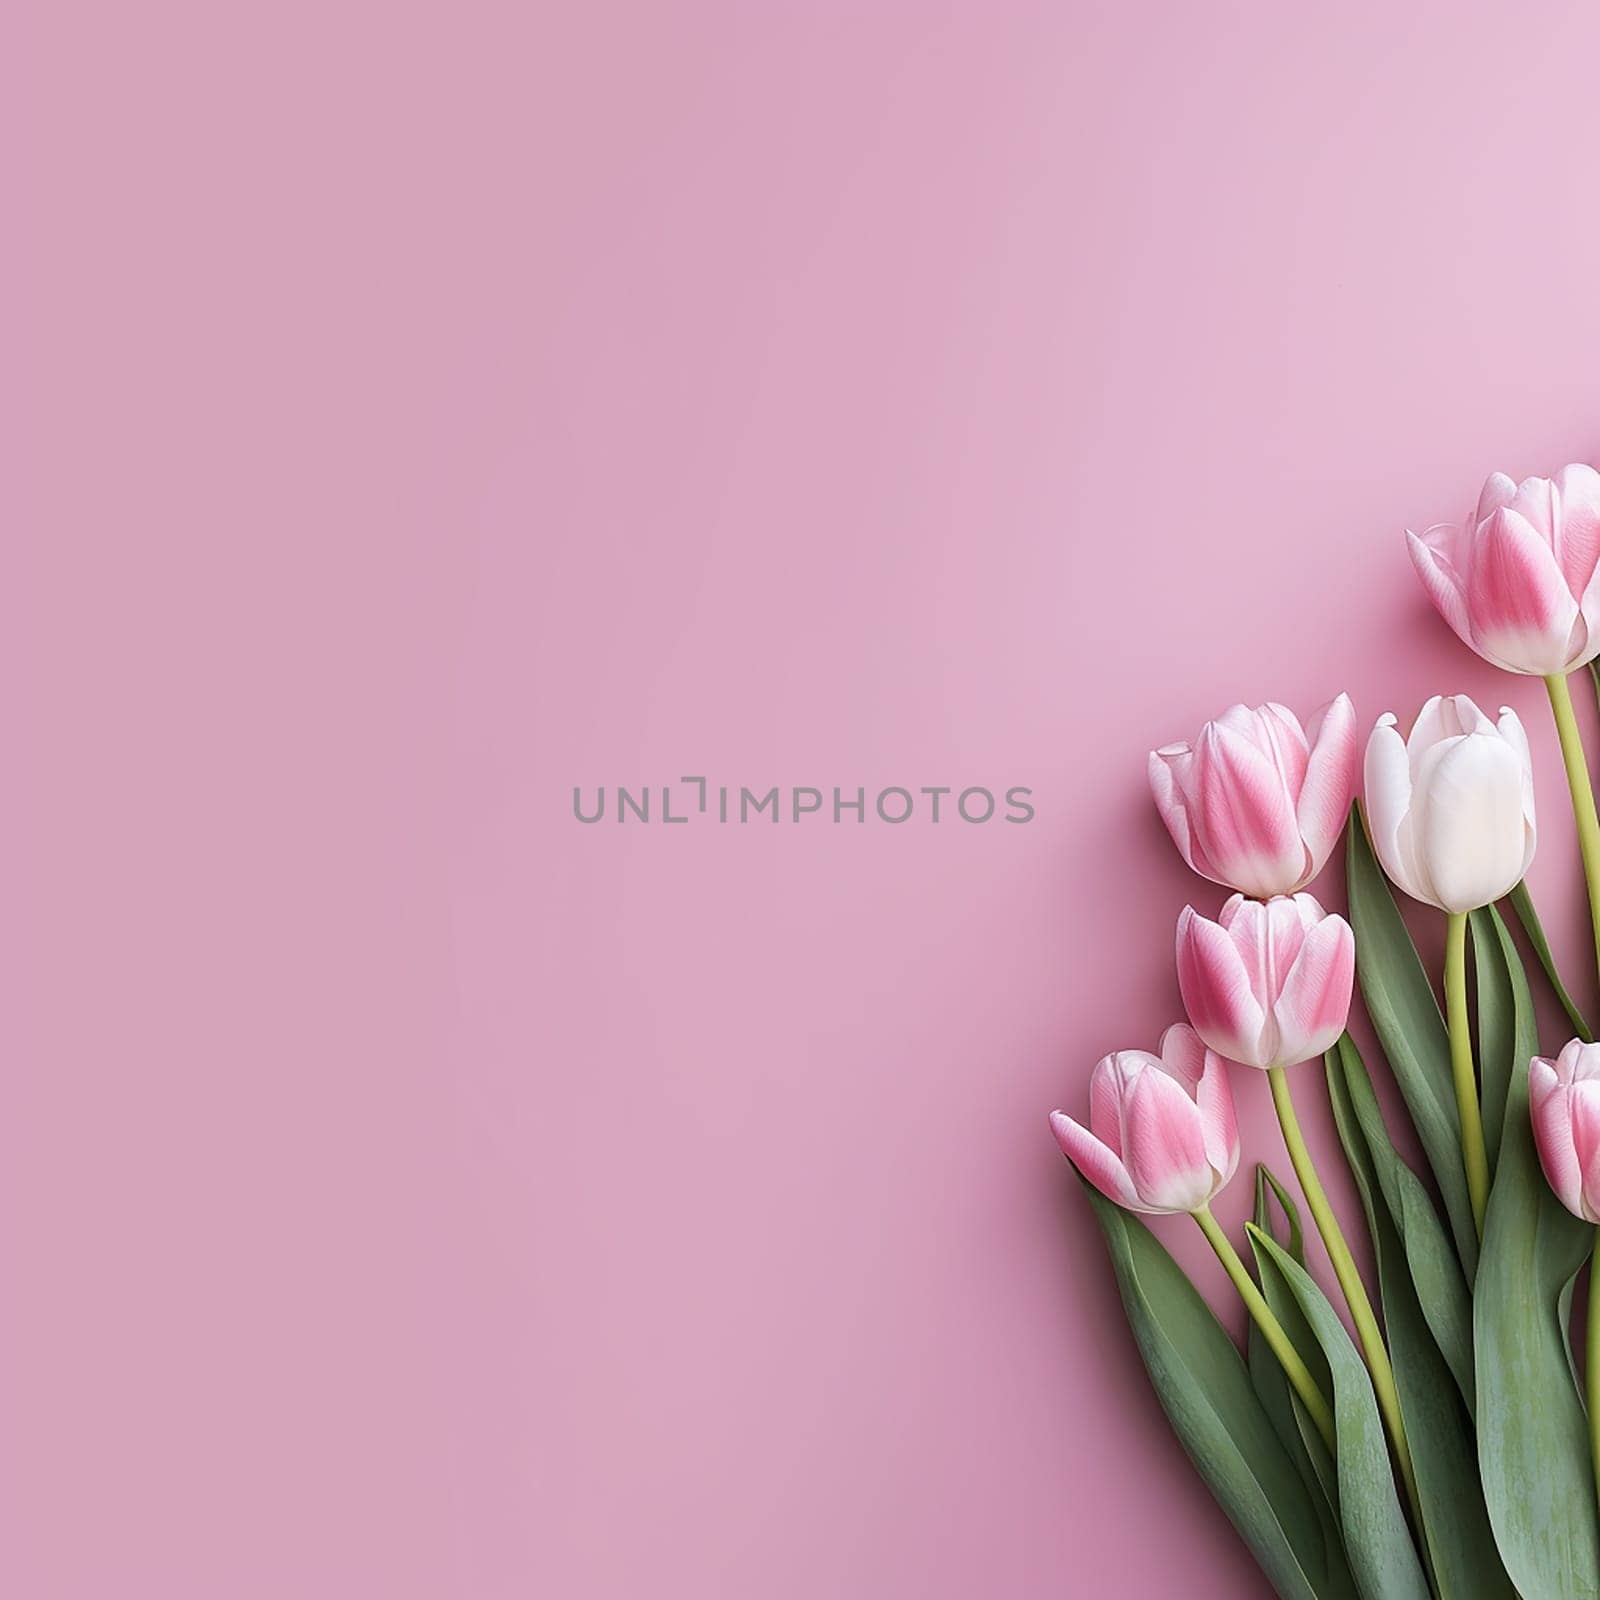 A bunch of pink and white tulips against a soft pink background.